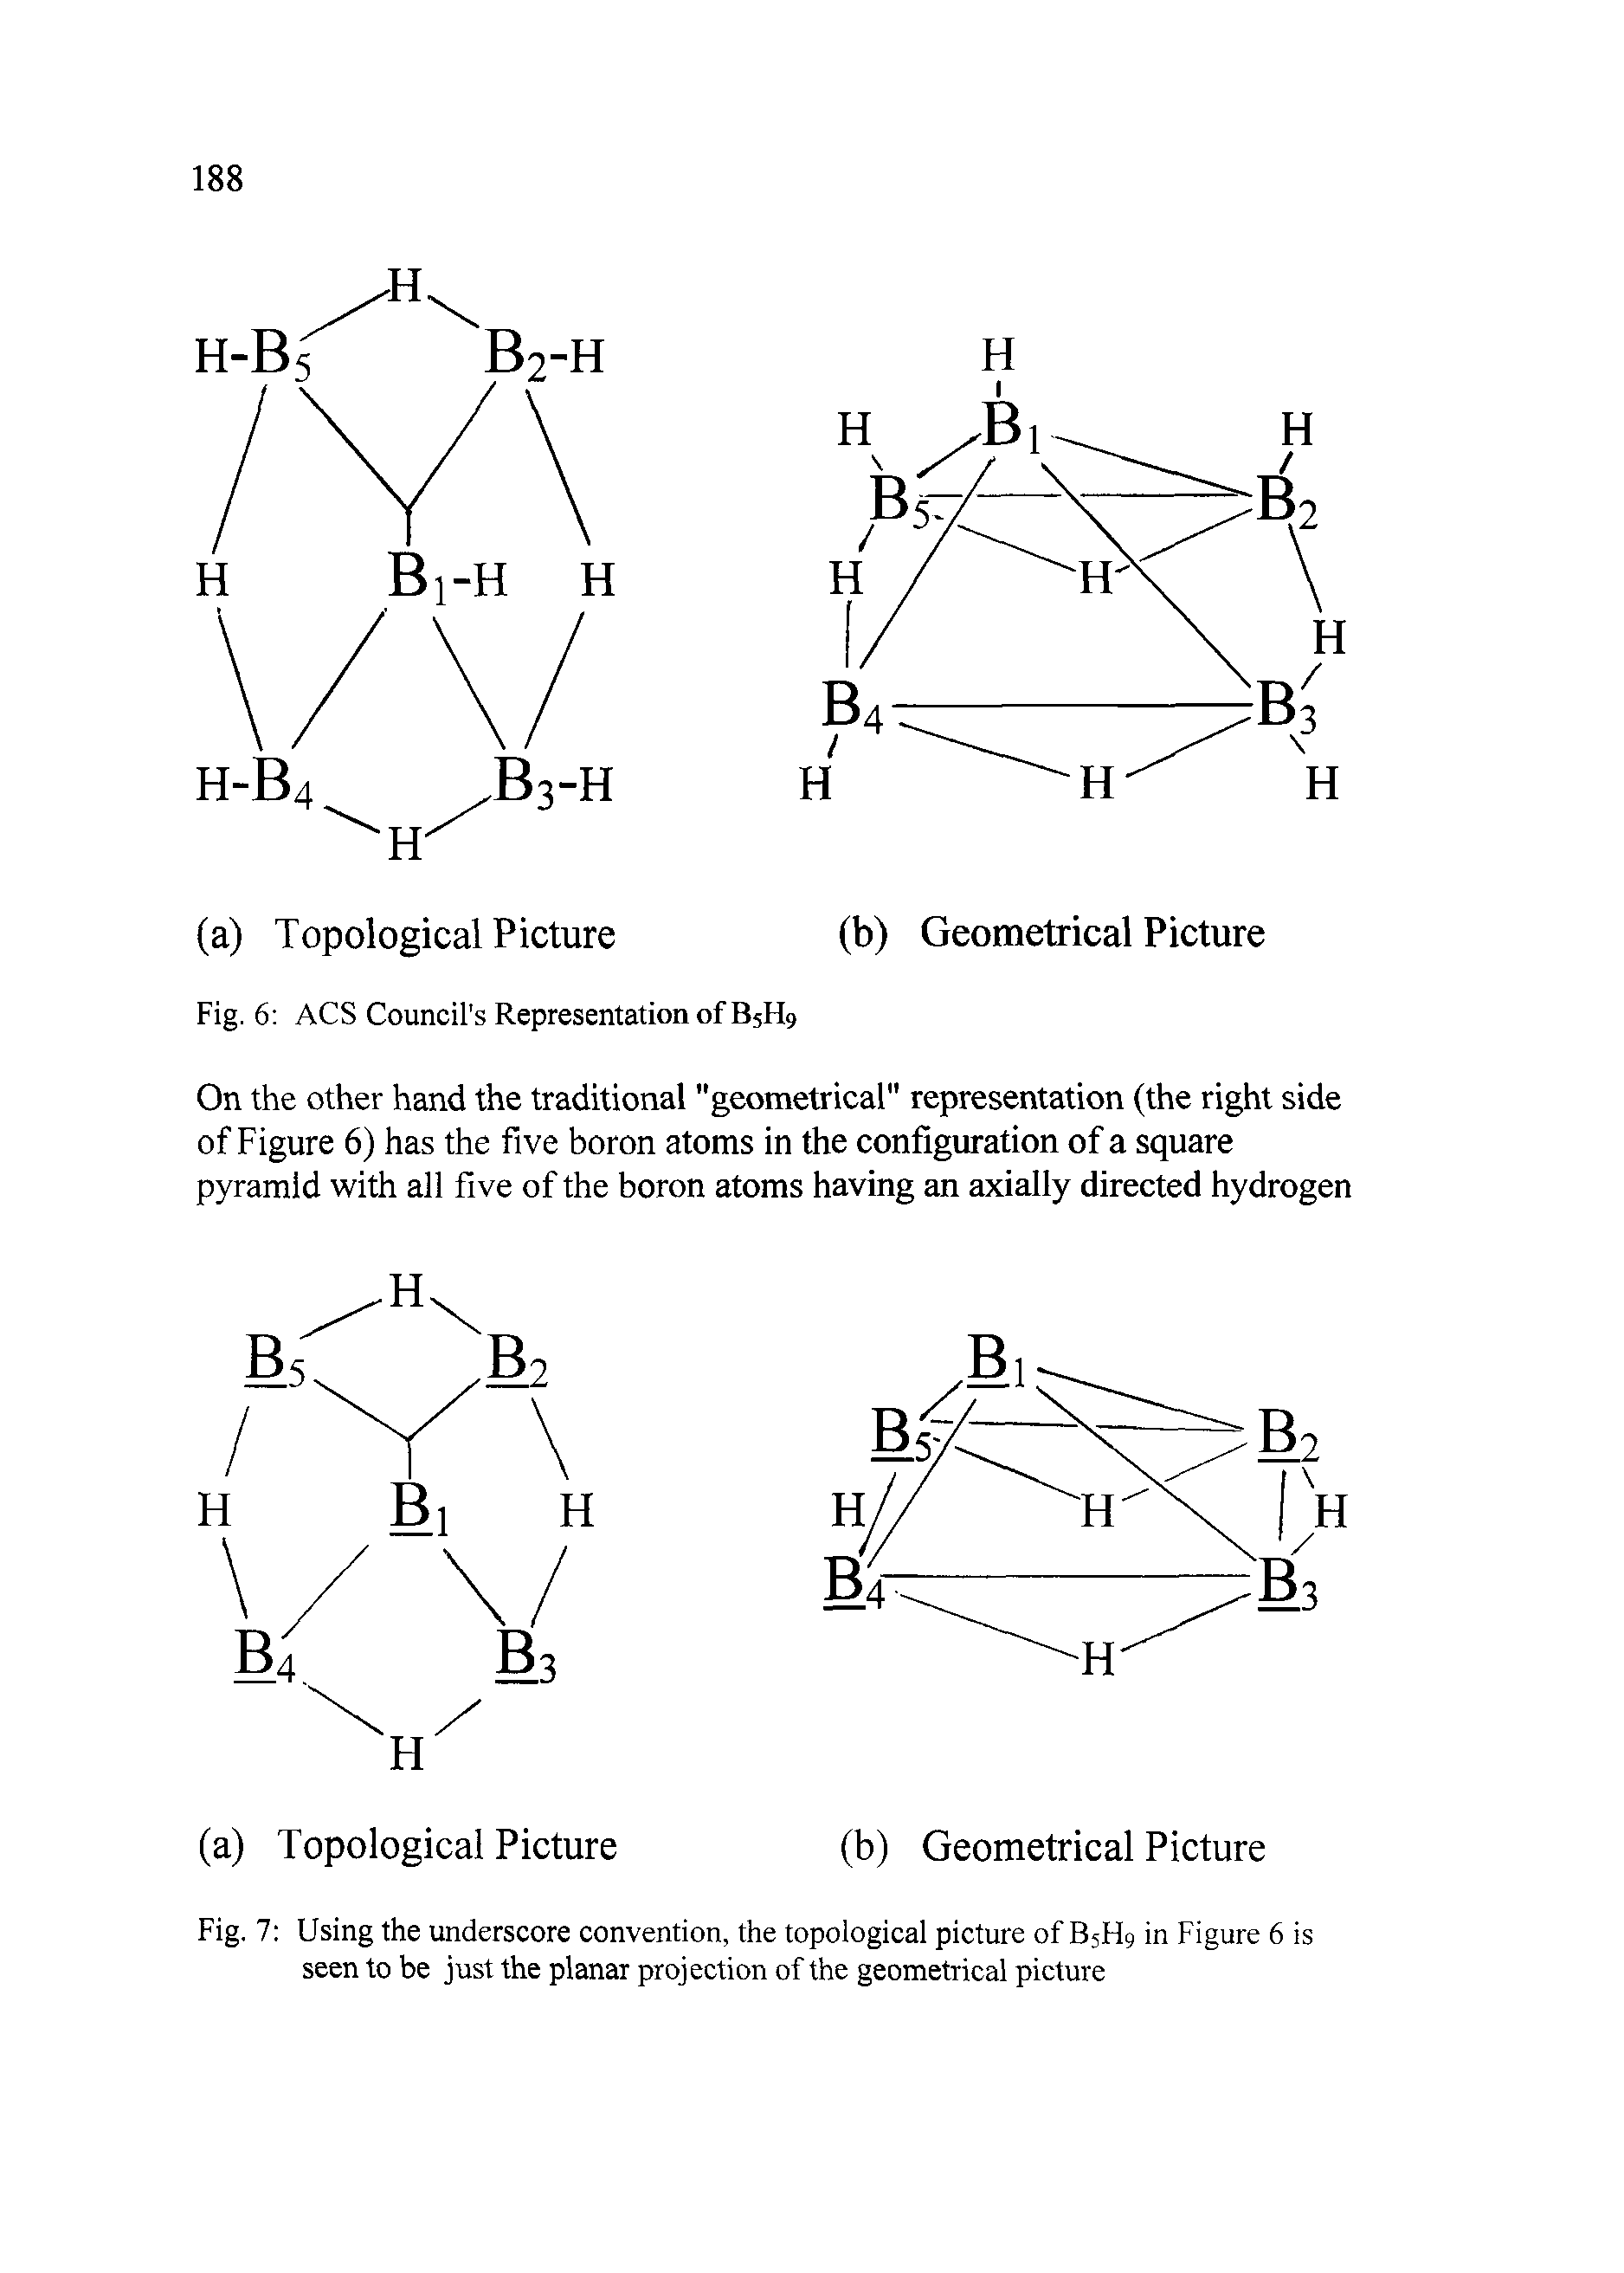 Fig. 7 Using the underscore convention, the topological picture of B5H9 in Figure 6 is seen to be just the planar projection of the geometrical picture...